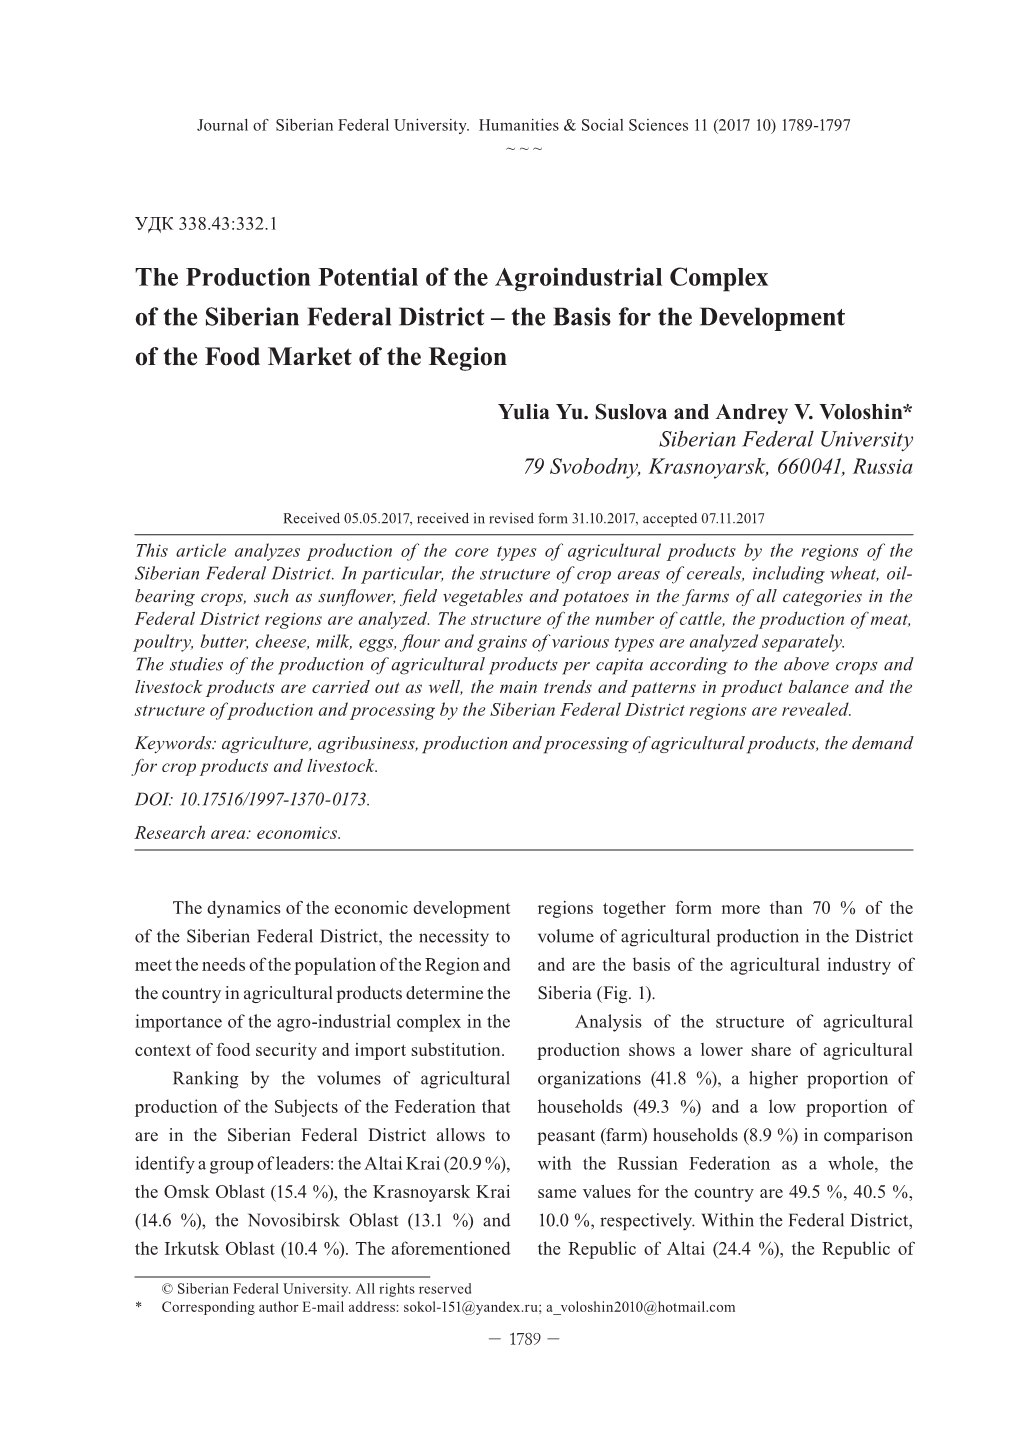 The Production Potential of the Agroindustrial Complex of the Siberian Federal District – the Basis for the Development of the Food Market of the Region